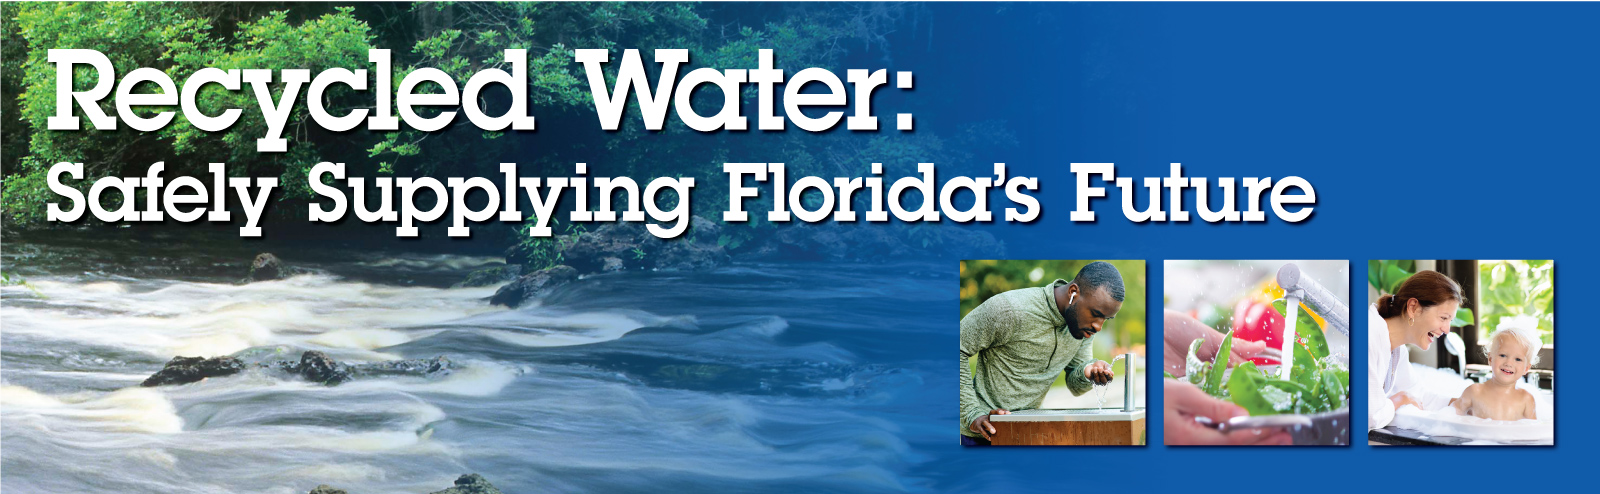 Recycled Water: Safety Supplying Florida's Future